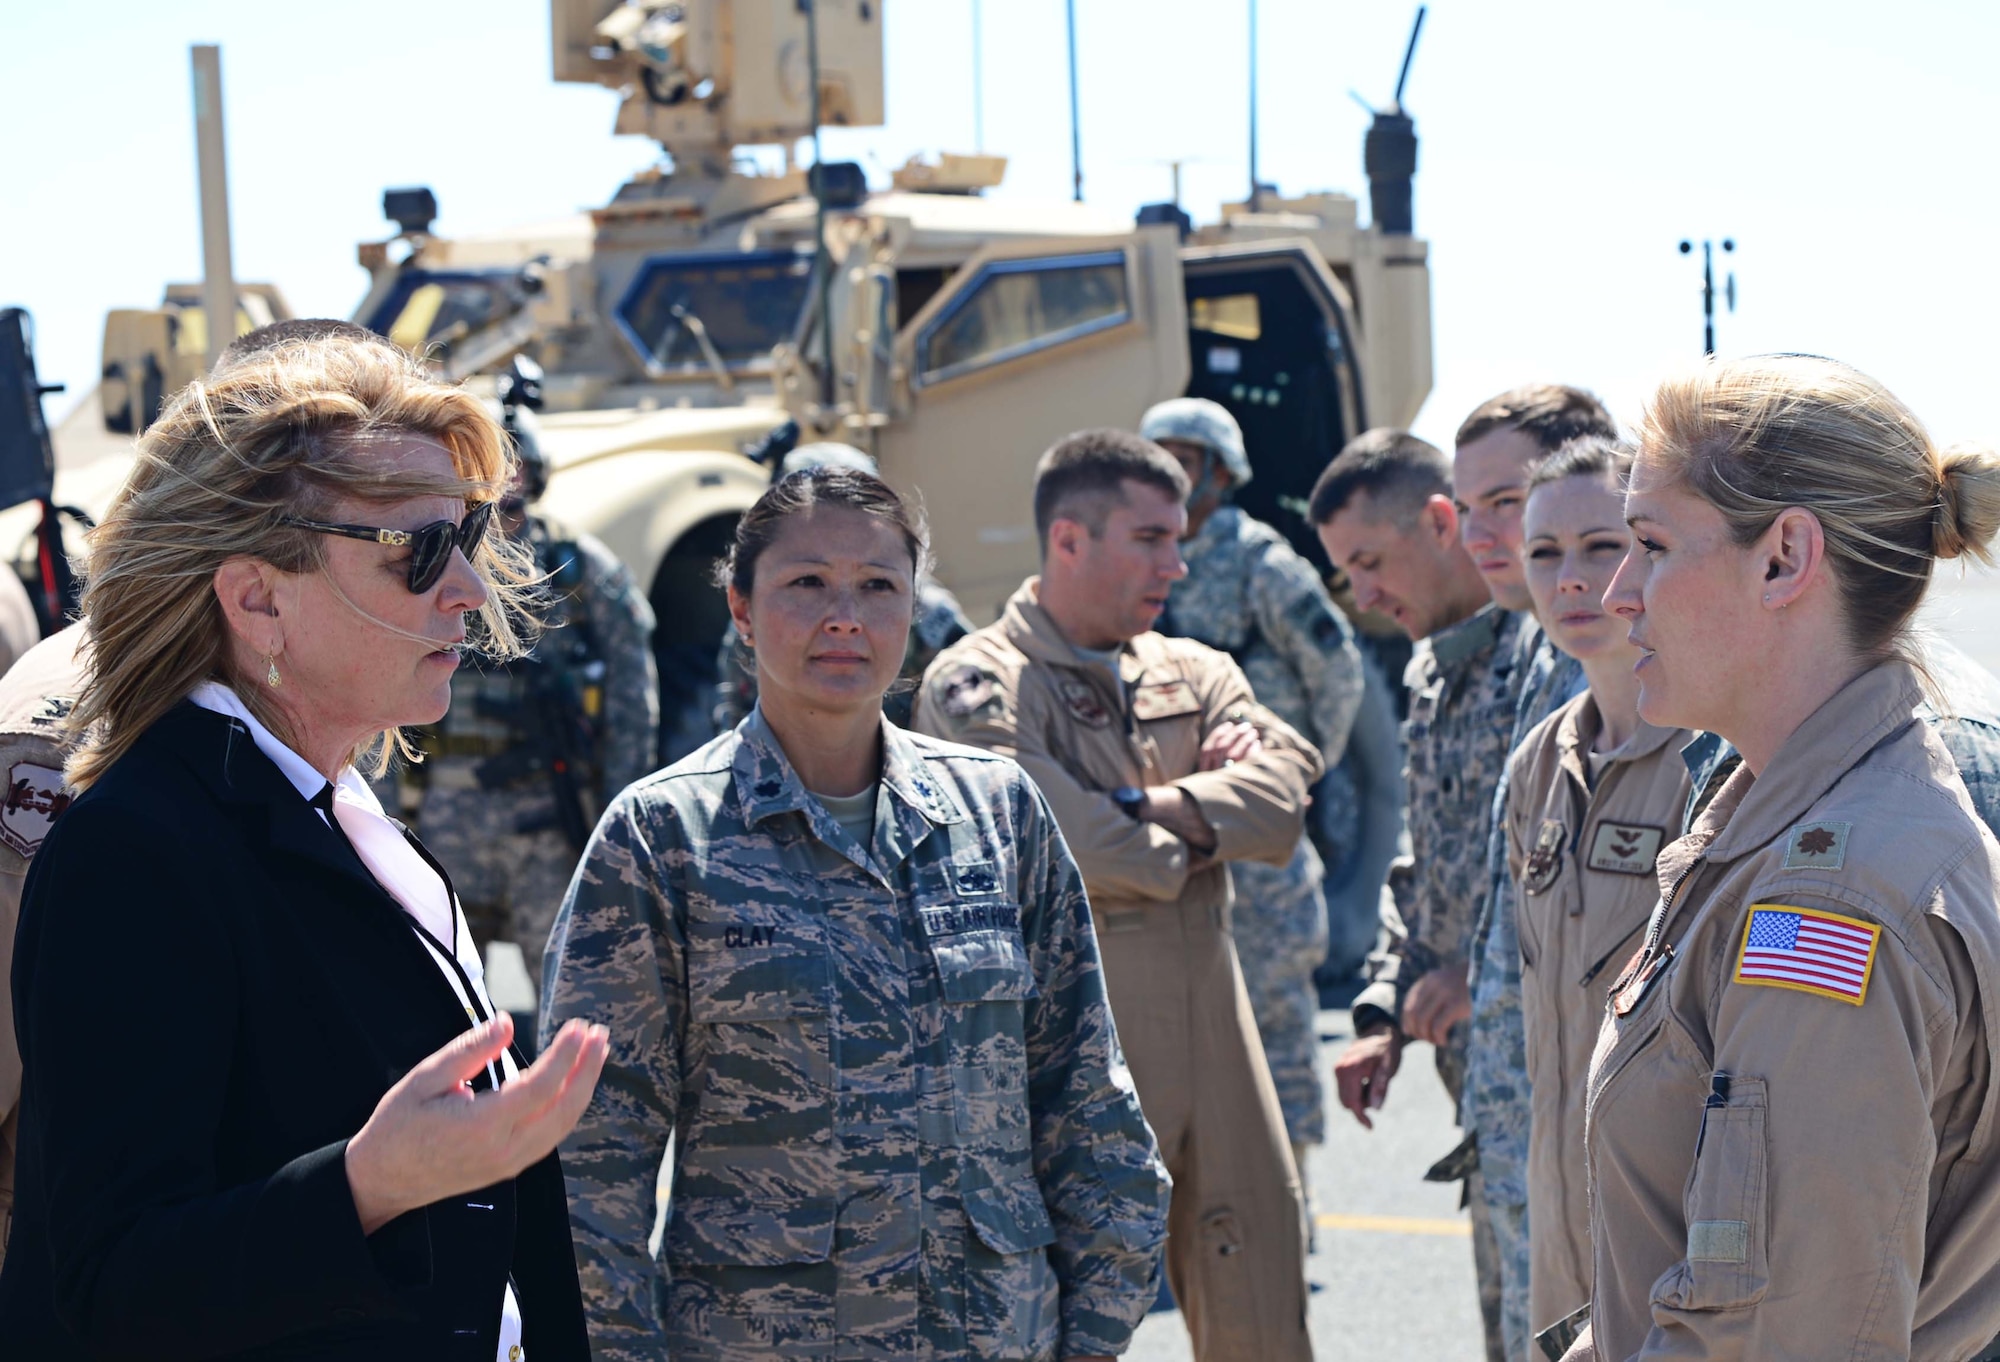 Maj. Sheila Carlson discusses C-130J Hercules mission capabilities with Secretary of the Air Force Deborah Lee James at an undisclosed location in Southwest Asia. During James' first visit to Air Forces Central Command’s area of responsibility as Secretary, she spoke with Airmen and gained a better understanding of the AOR and its missions. Carlson is the 737th Expeditionary Airlift Squadron assistant director of operations. (U.S. Air Force photo/Senior Airman Desiree W. Moye)